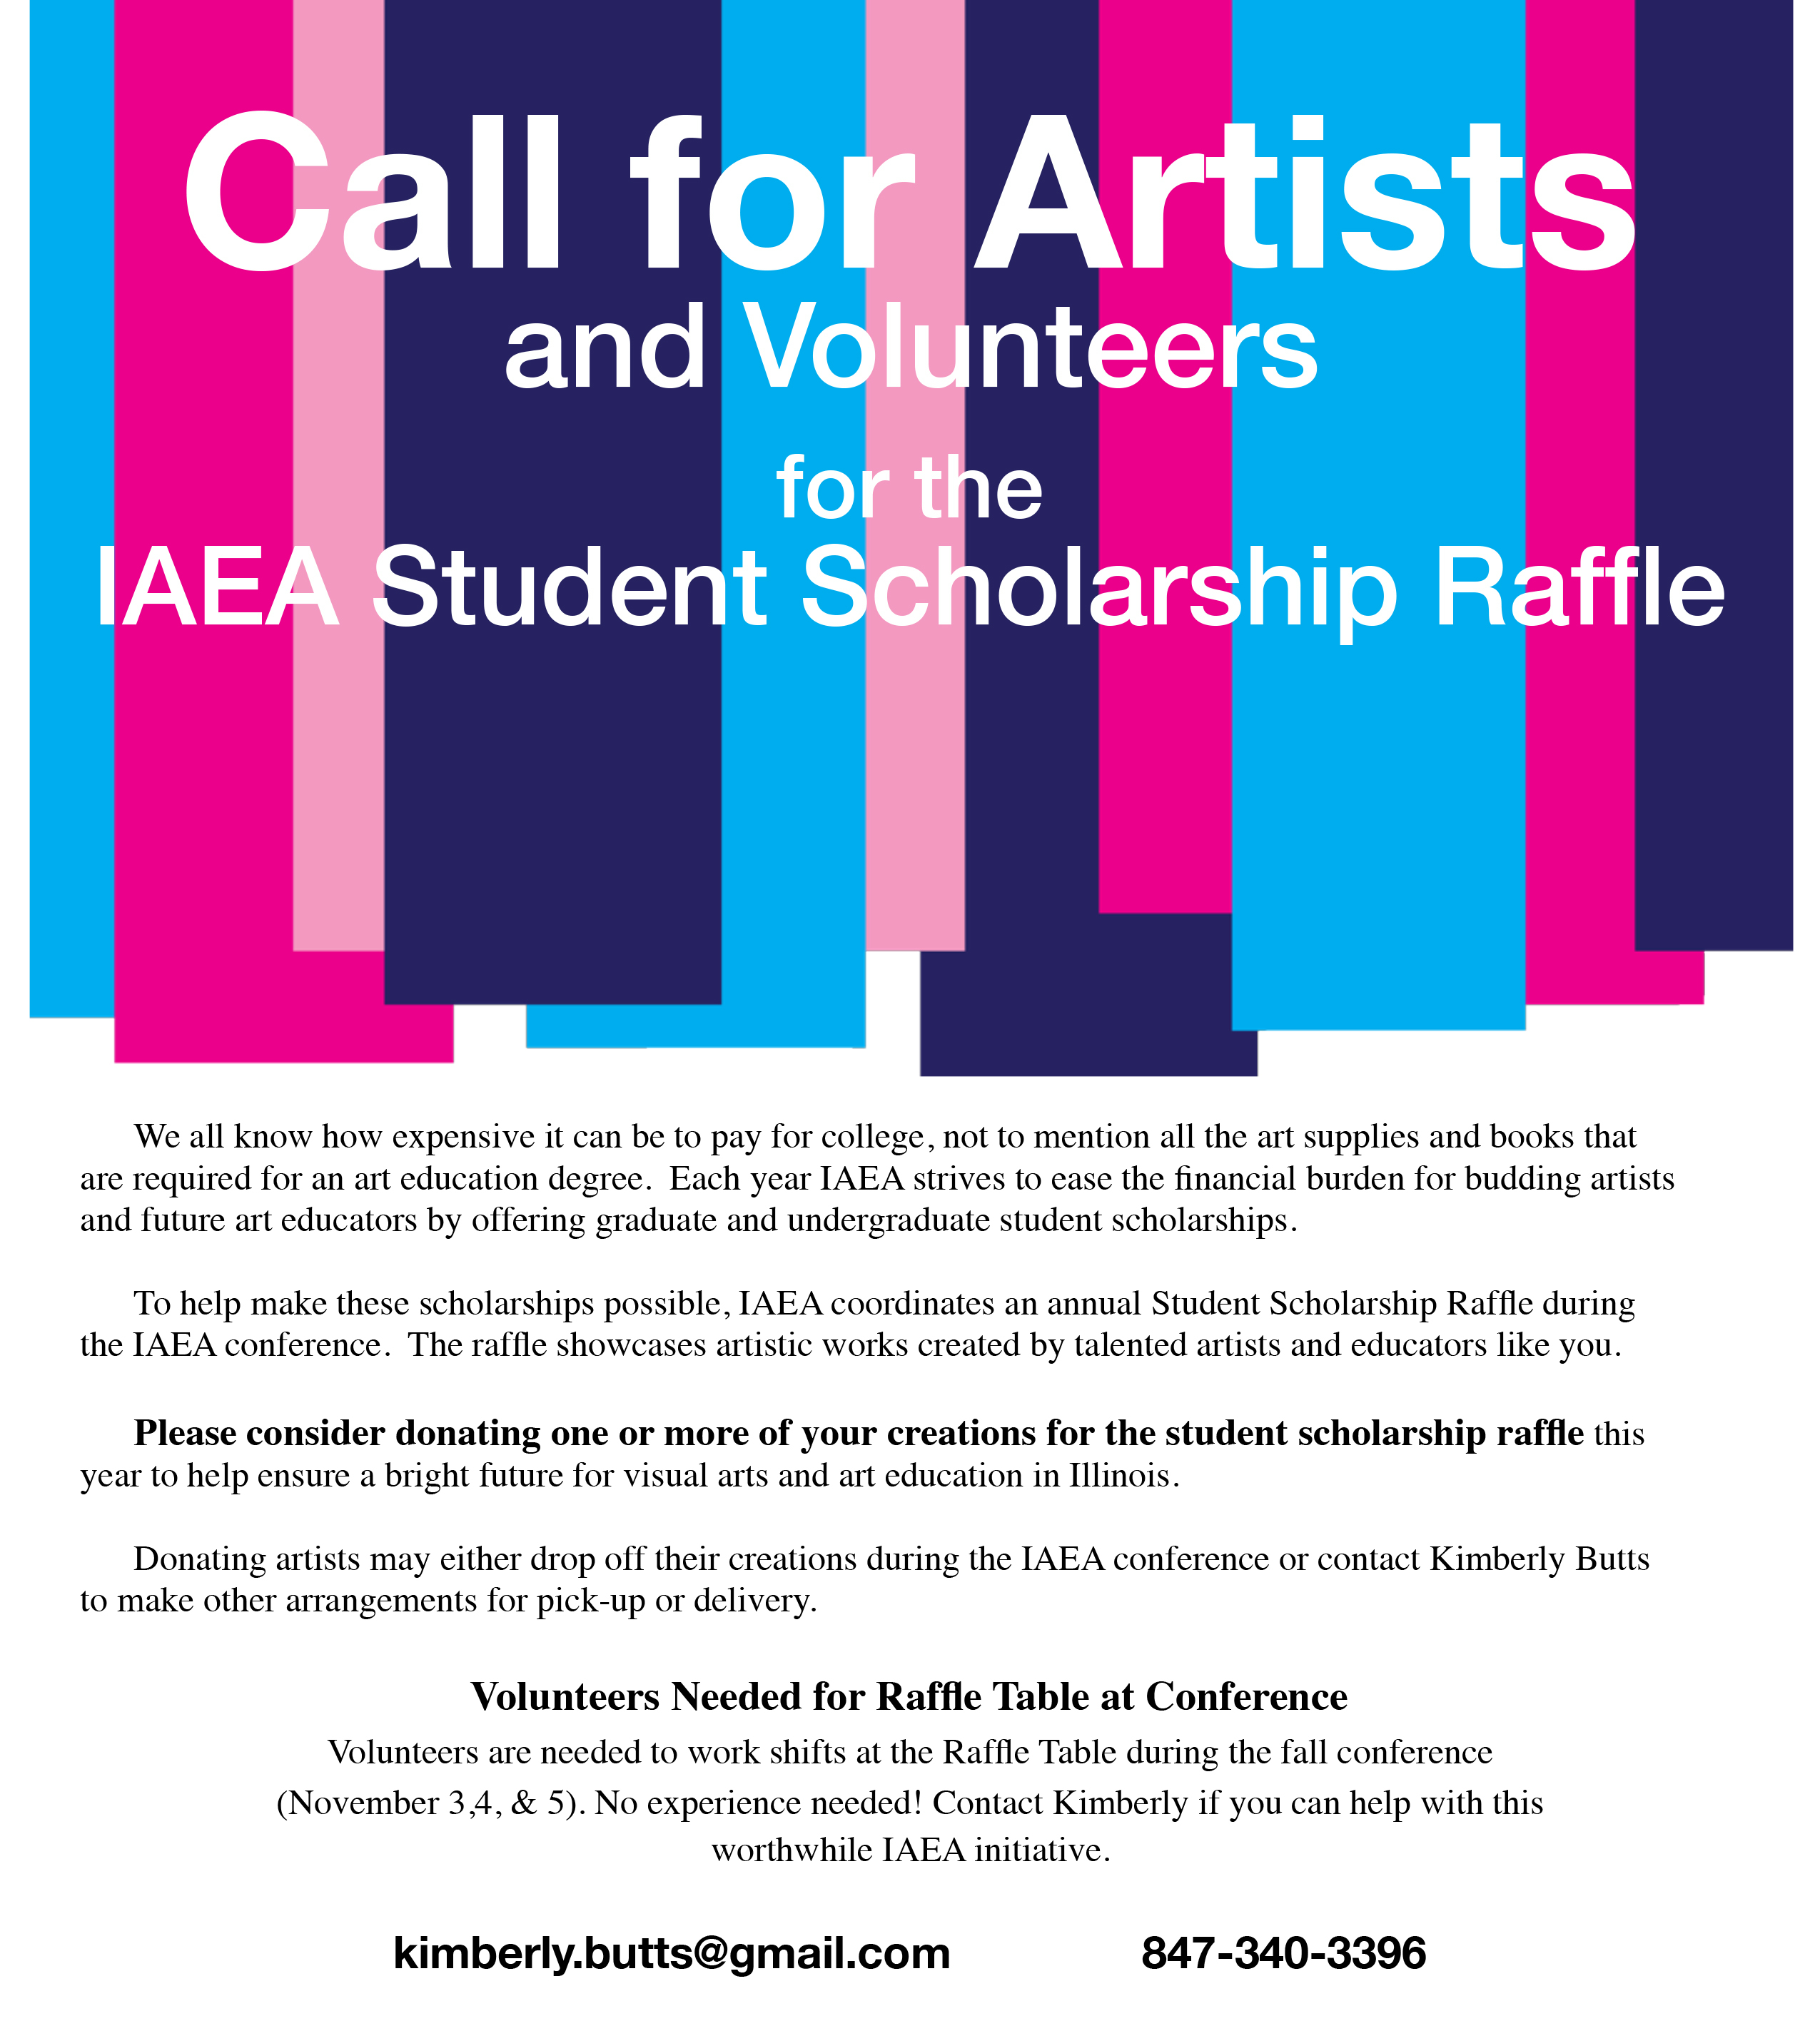 Student Scholarship Raffle - Call For Artists.pages